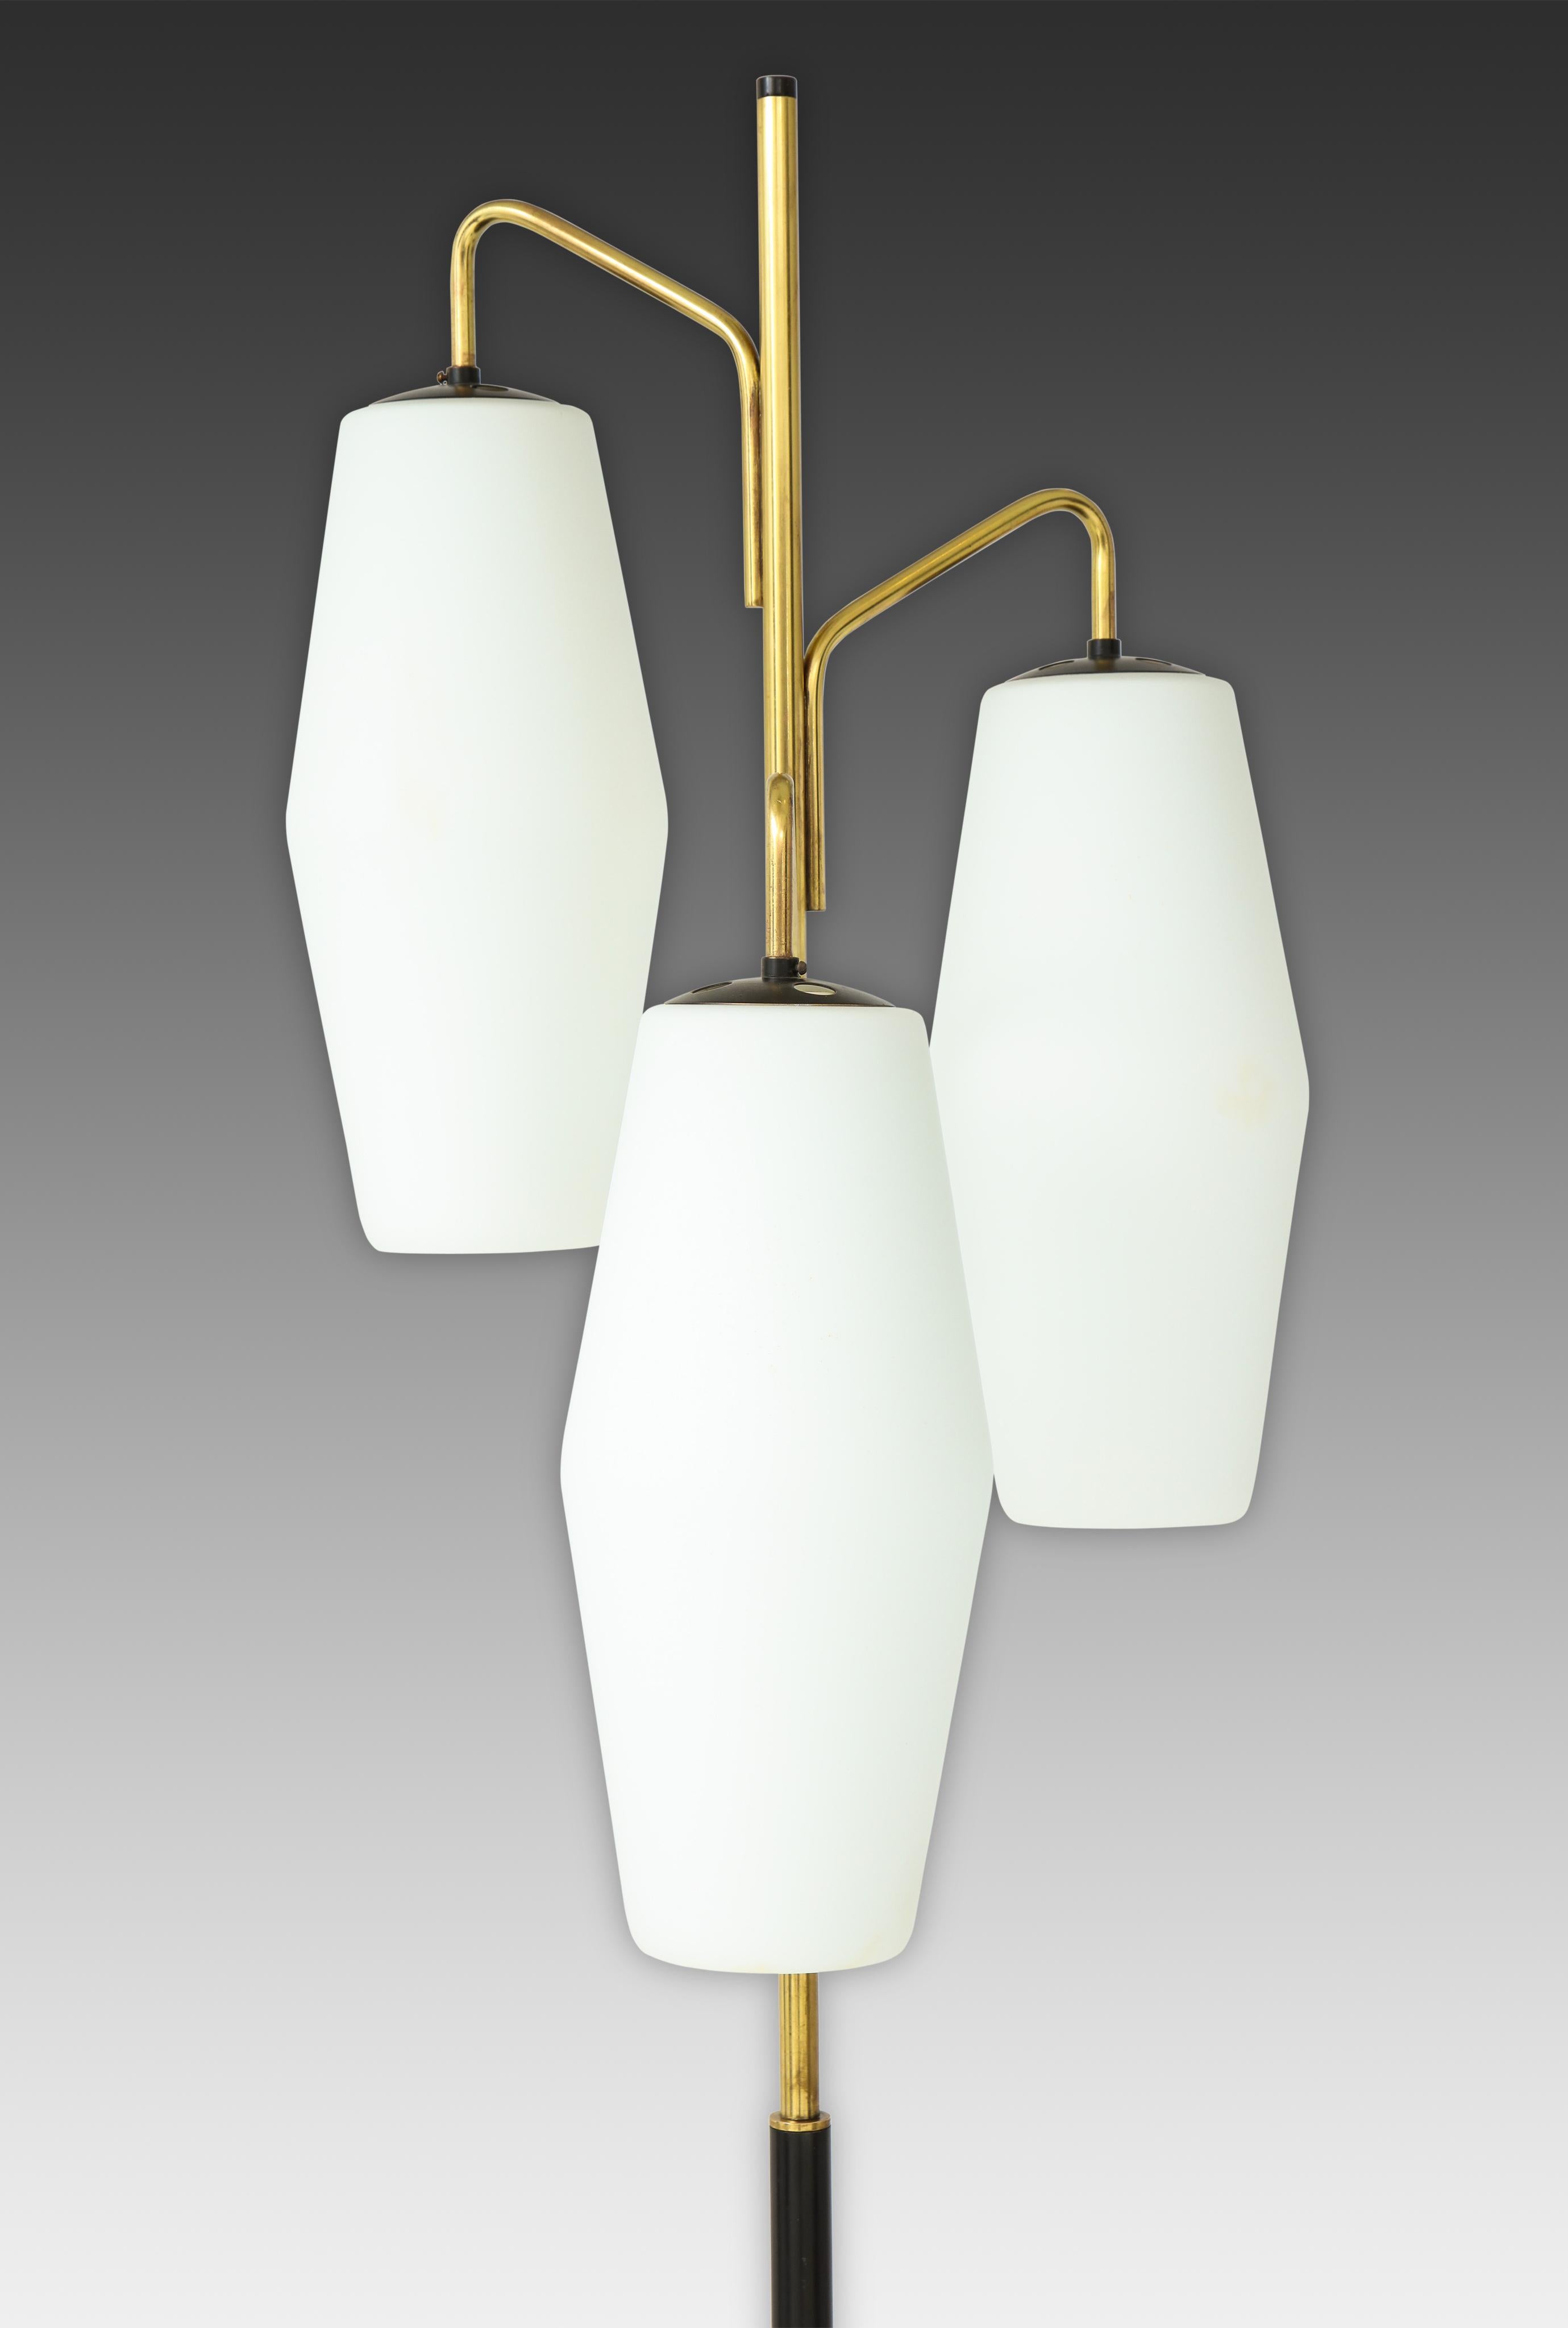 Stilnovo floor lamp with three opaline glass lantern shades suspended on gilt lacquer arms and black enameled stem ending on Carrara marble base, Italy, 1960s. 
Newly rewired to U.S. standards.

Literature:
Thomas Braüniger, Stilnovo: apparecchi